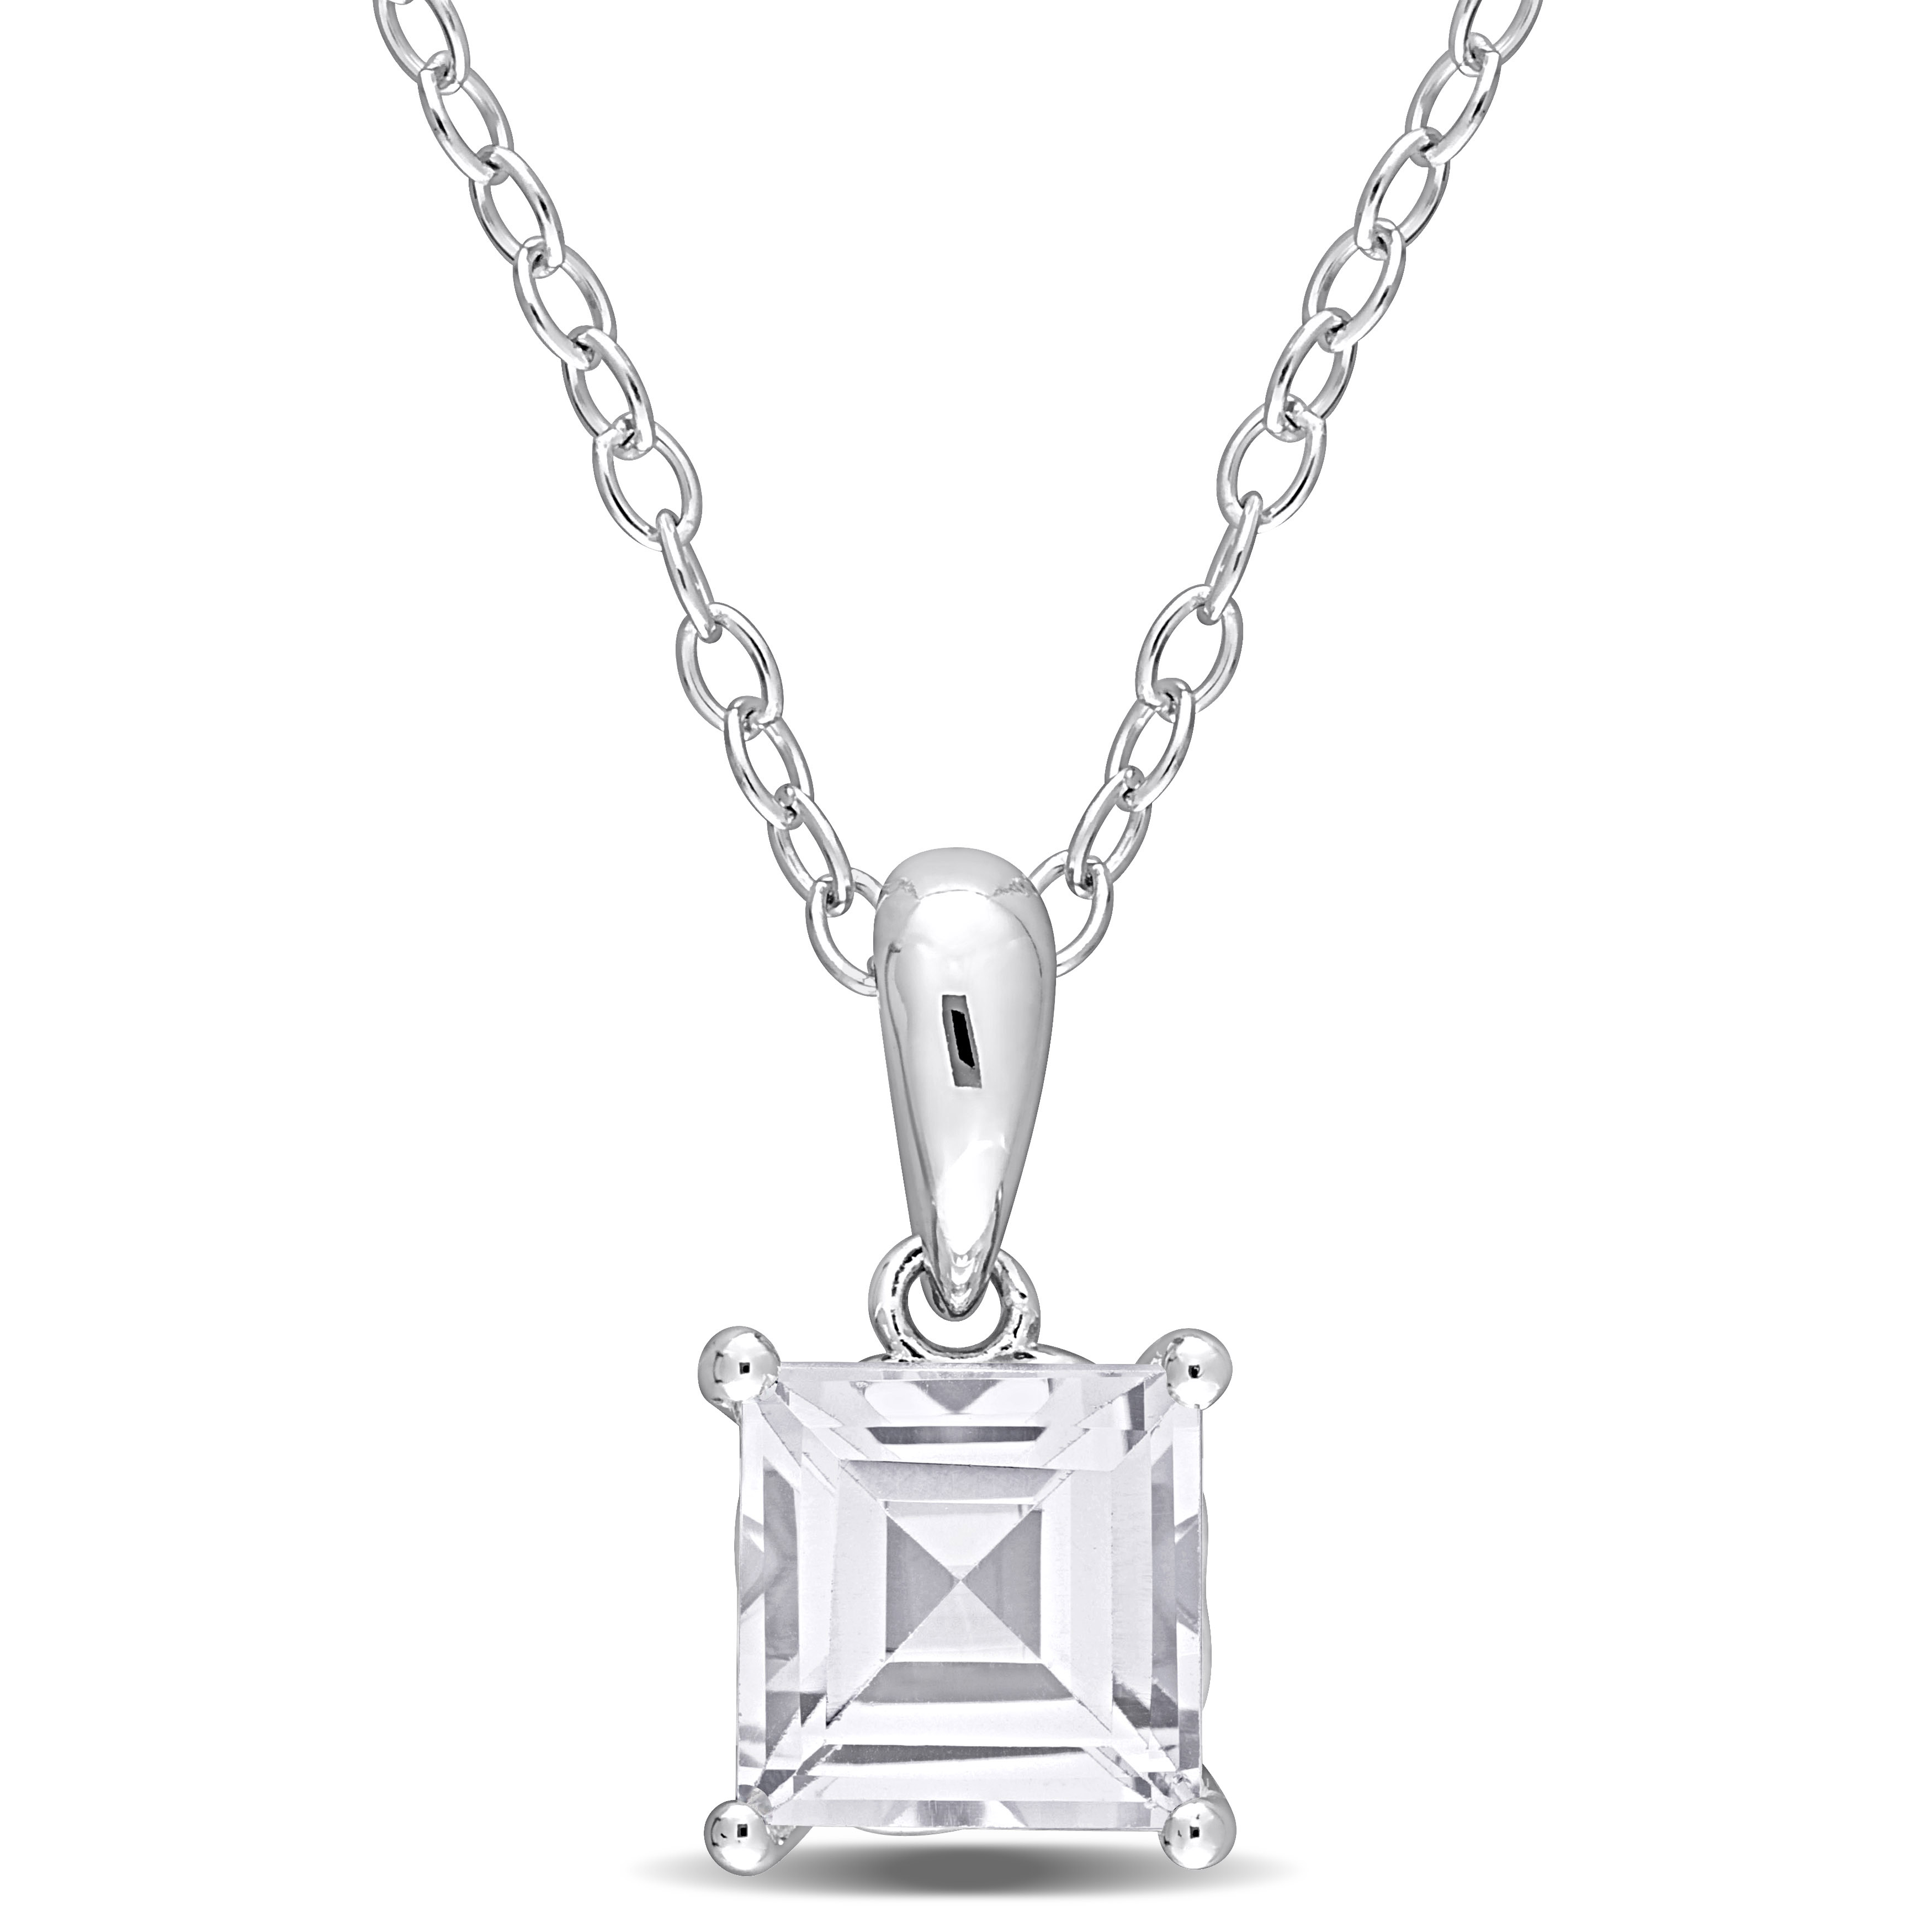 1 1/3 CT TGW Princess Cut White Topaz Solitaire Heart Design Pendant with Chain in Sterling Silver - 18 in.